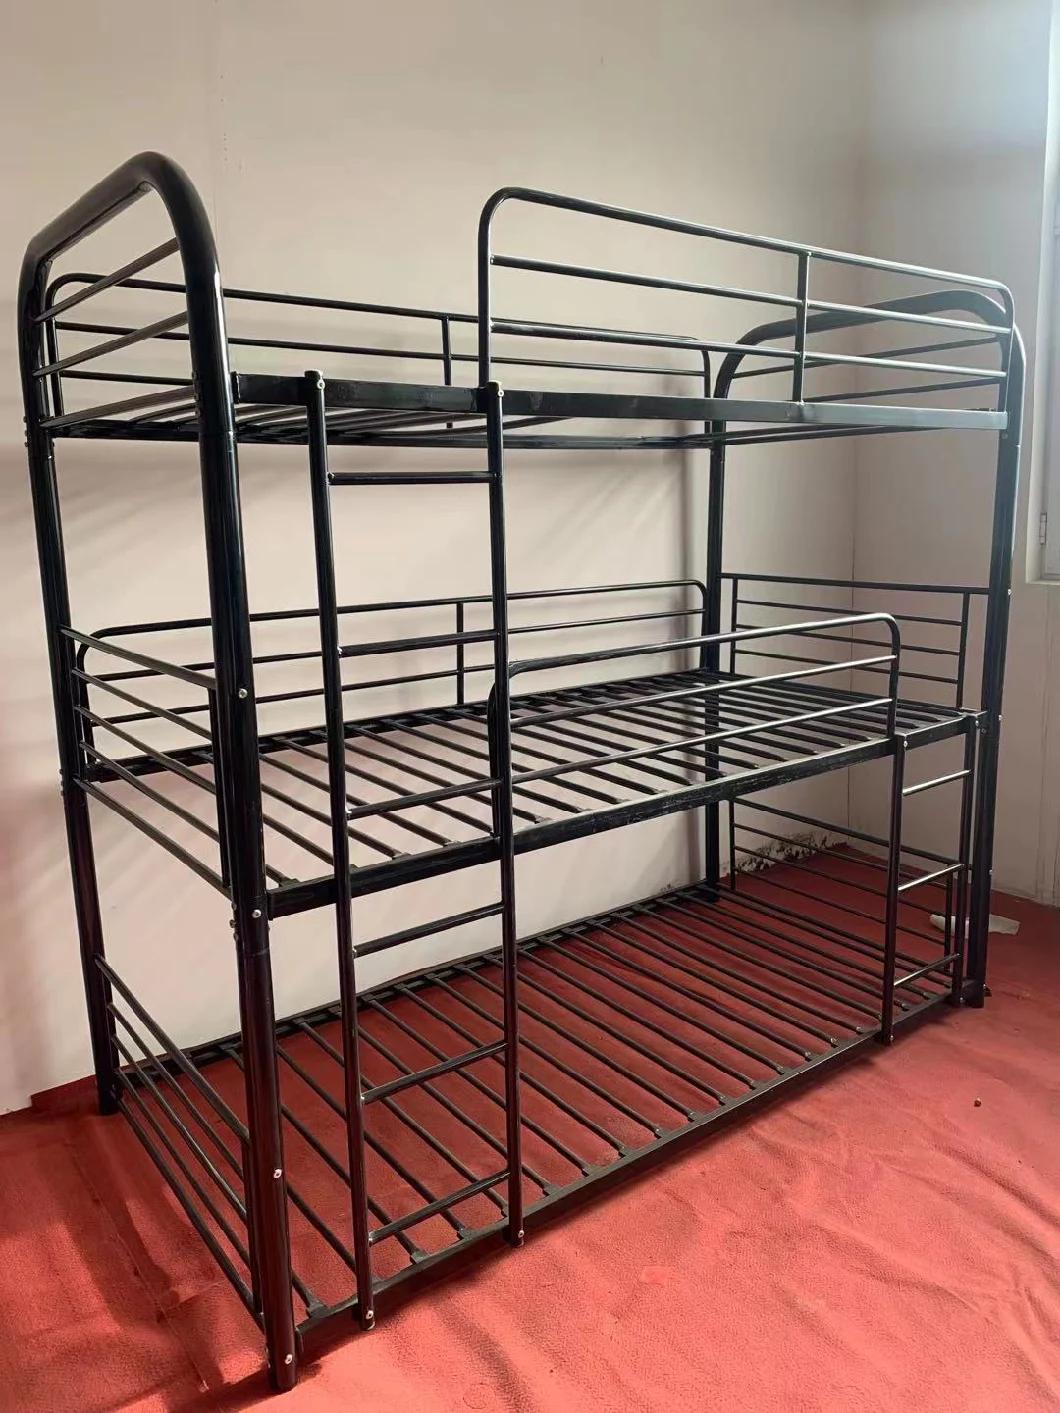 Multi Color High Quality Triple Bunk Bed with Ladder Efficient and Convenient